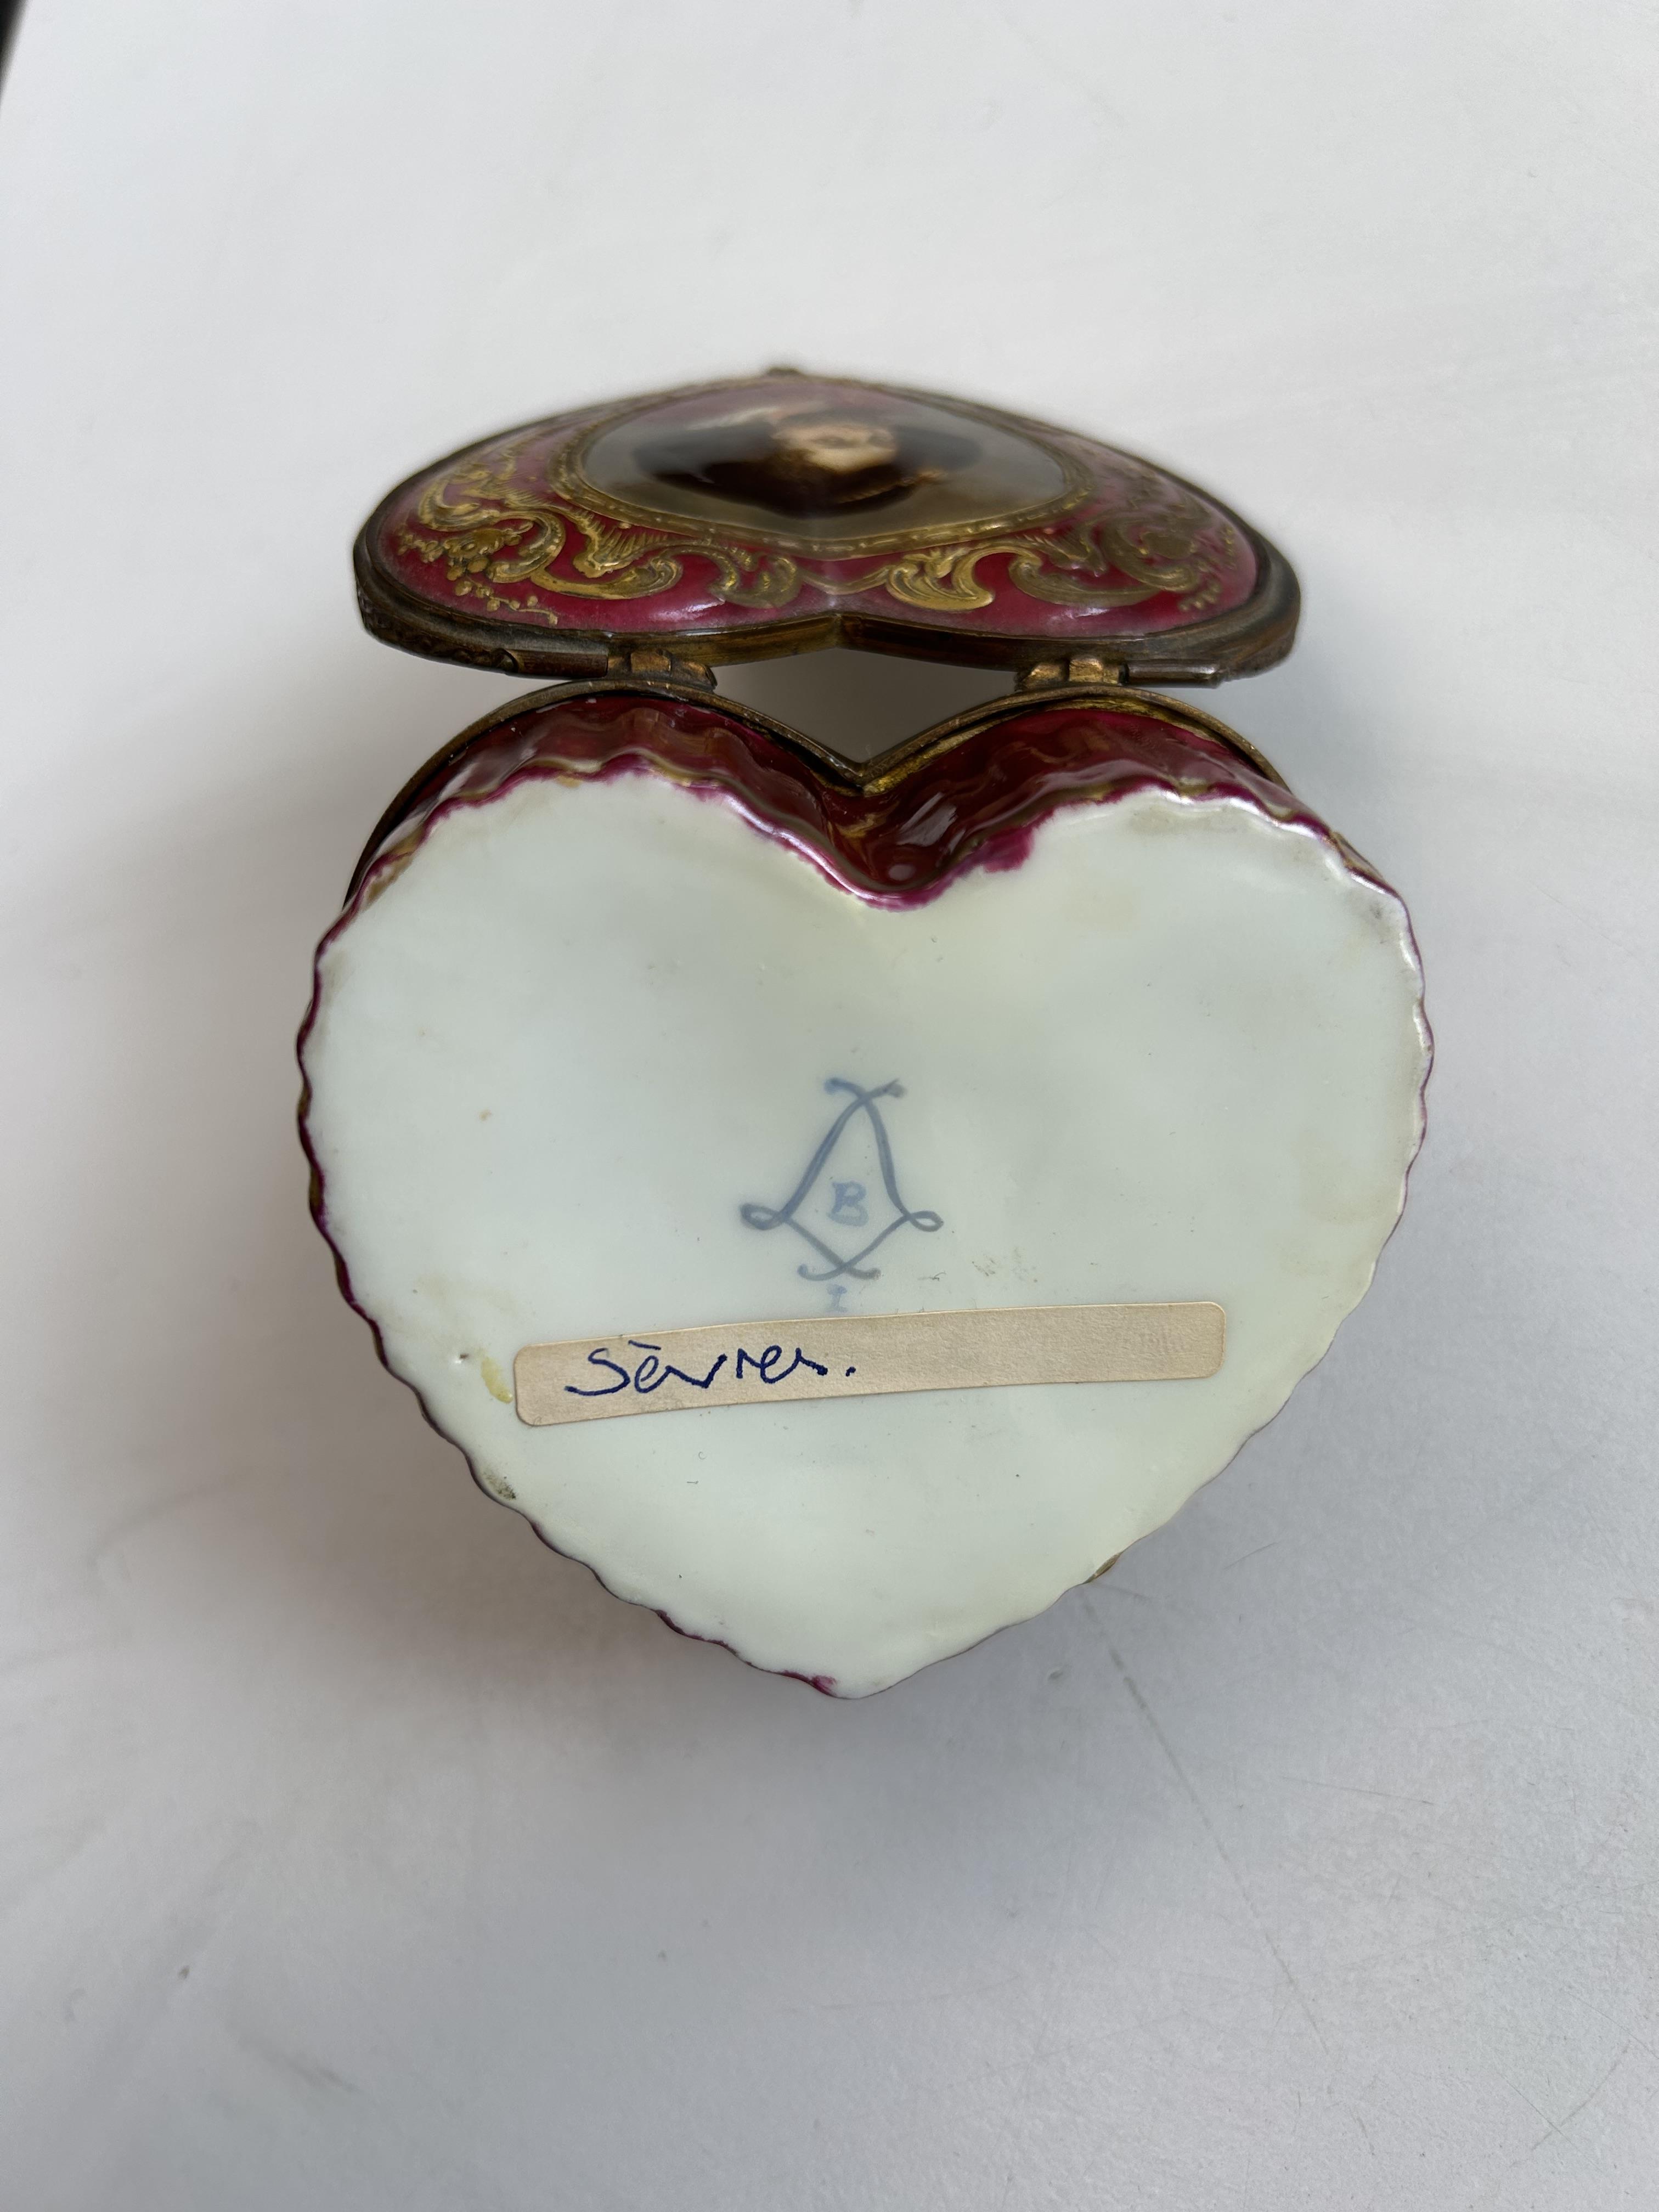 Two late 19th century Sevres style porcelain trinket boxes - Image 3 of 7